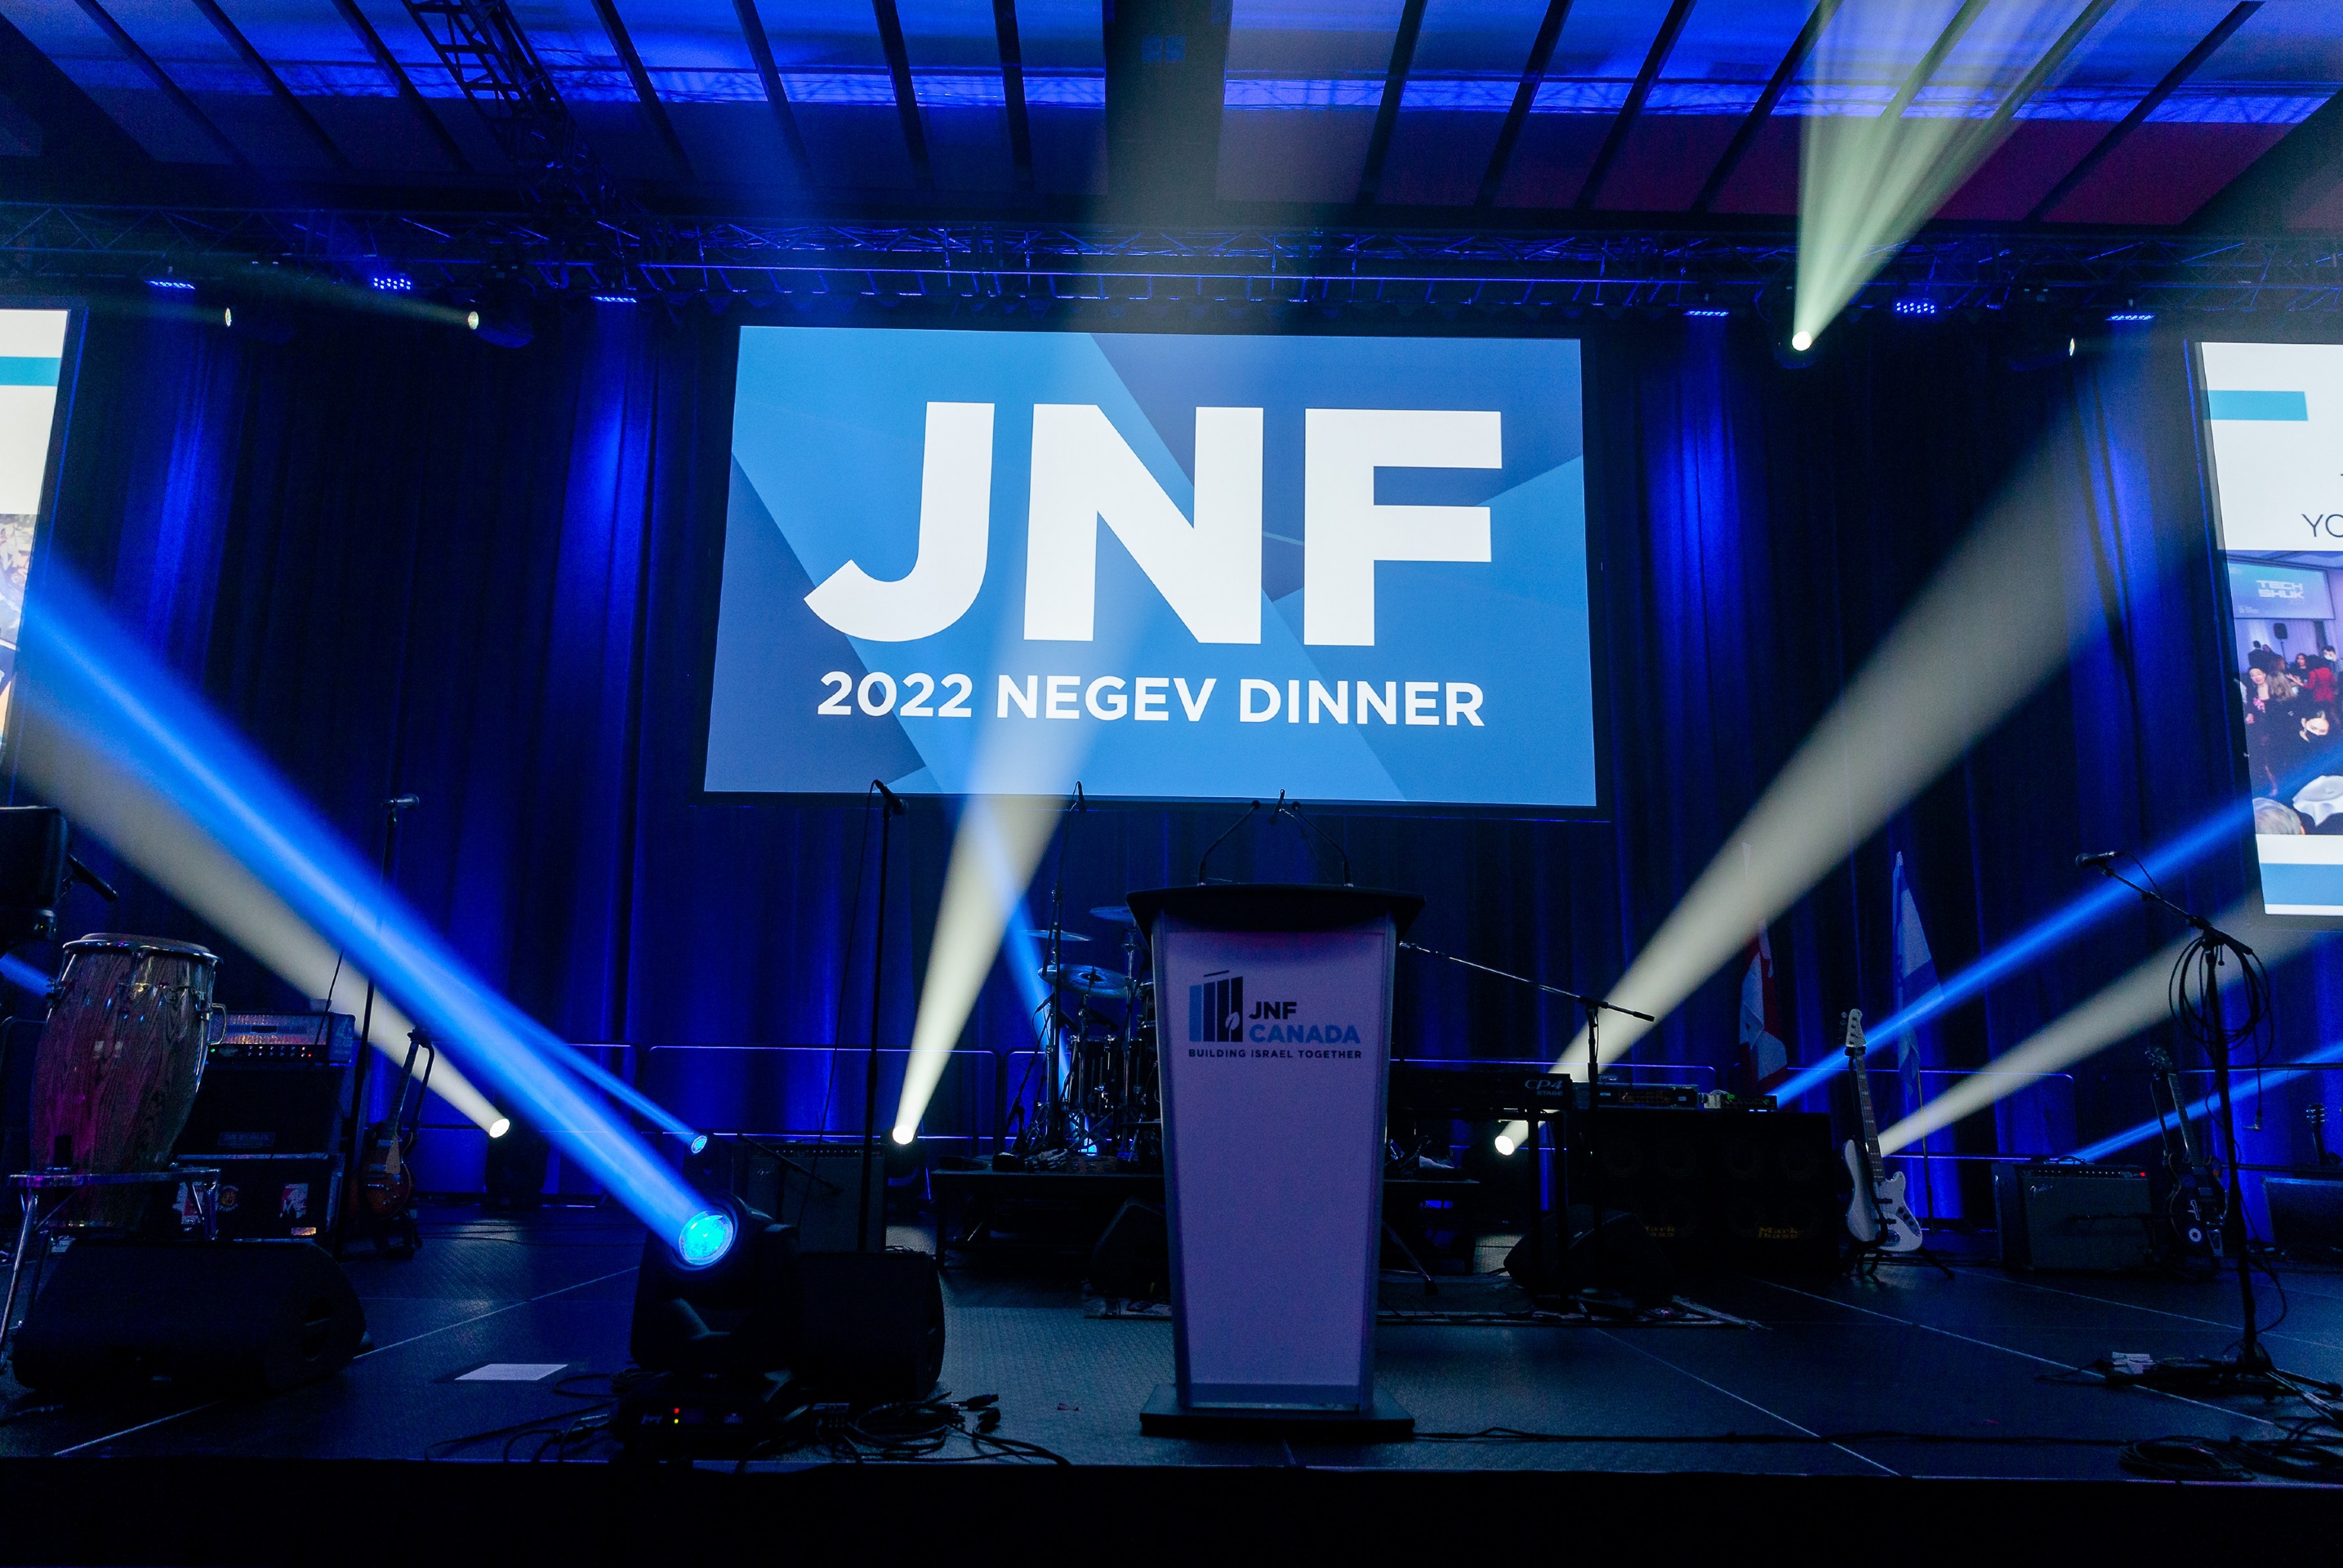 Jewish National Fund of Canada | Welcome to the Jewish National Fund Toronto Region’s website.  We invite you to become involved in the life altering work of JNF in Israel.  We organize event